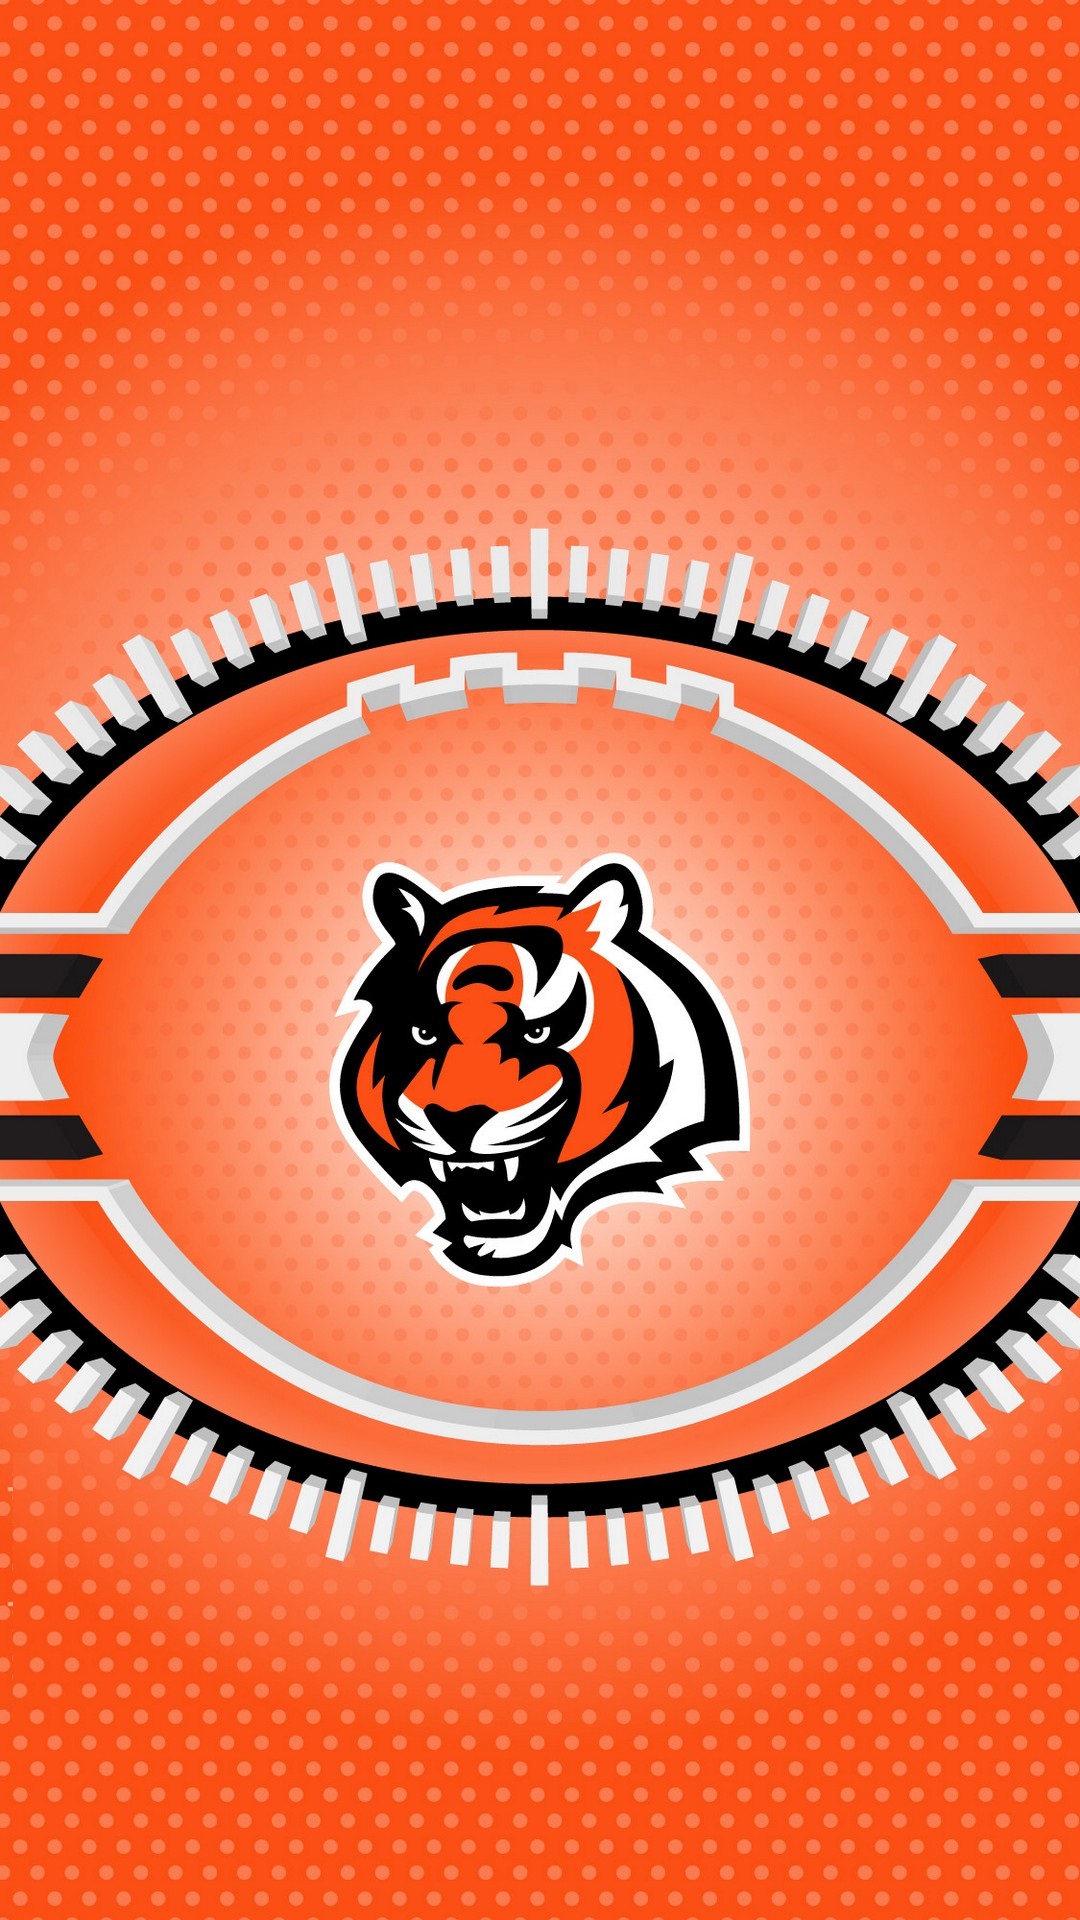 Cincinnati Bengals iPhone 6s Plus Wallpaper with high-resolution 1080x1920 pixel. Download and set as wallpaper for Apple iPhone X, XS Max, XR, 8, 7, 6, SE, iPad, Android